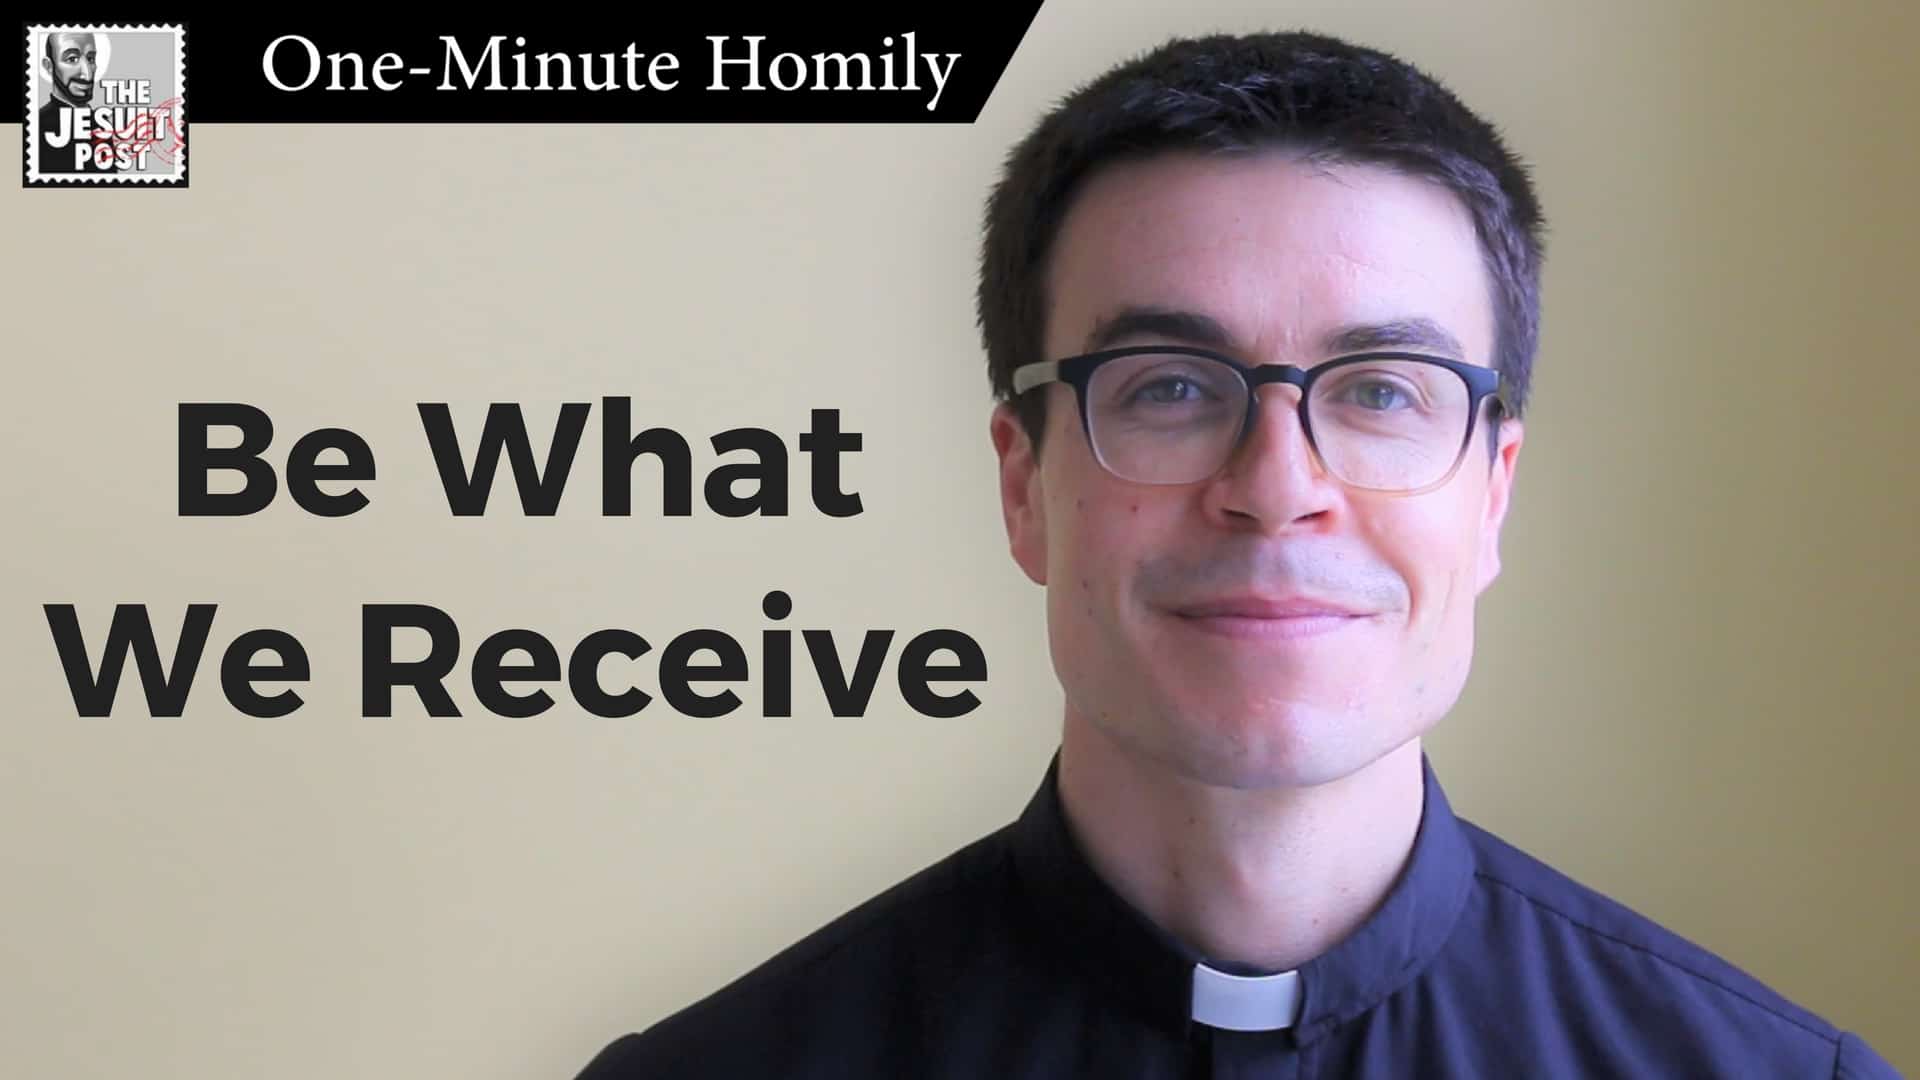 One-Minute Homily: “Be What We Receive”